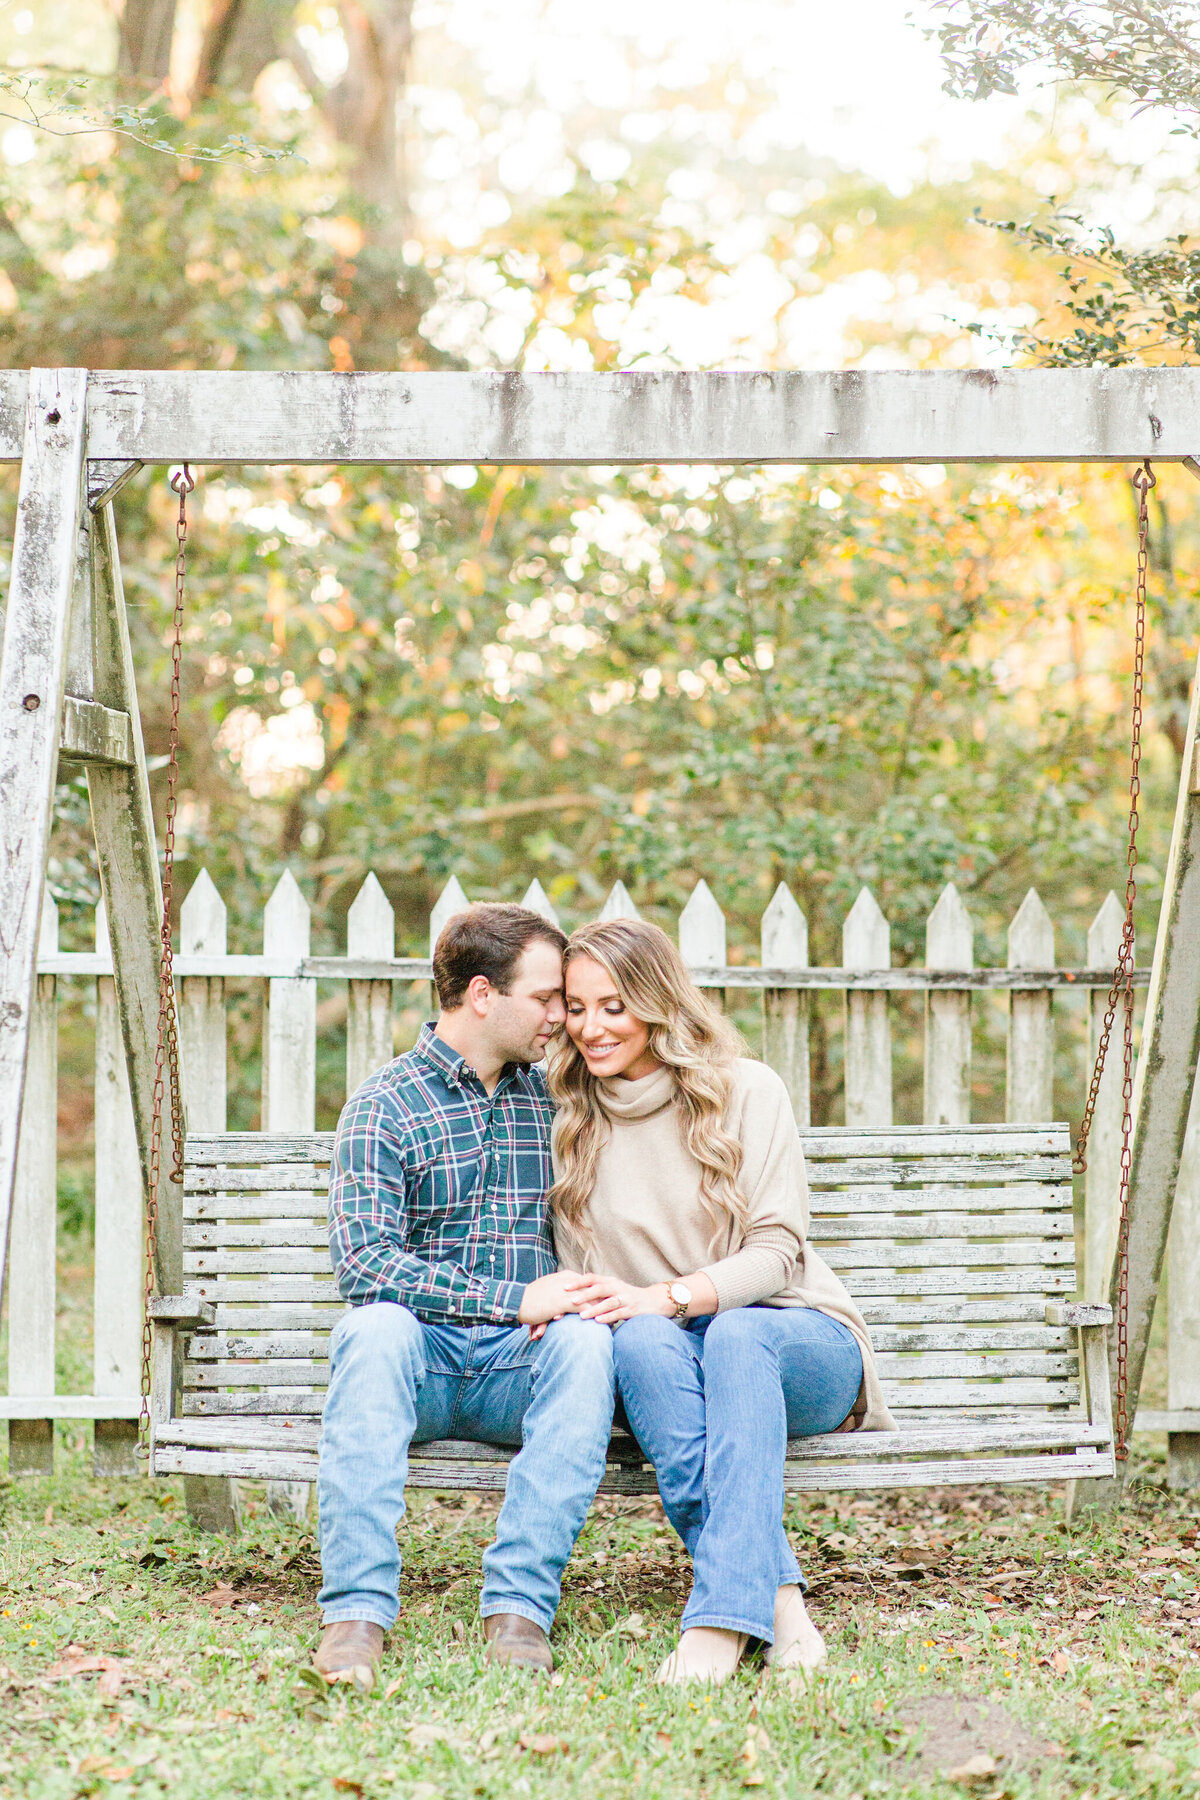 Renee Lorio Photography South Louisiana Wedding Engagement Light Airy Portrait Photographer Photos Southern Clean Colorful166666